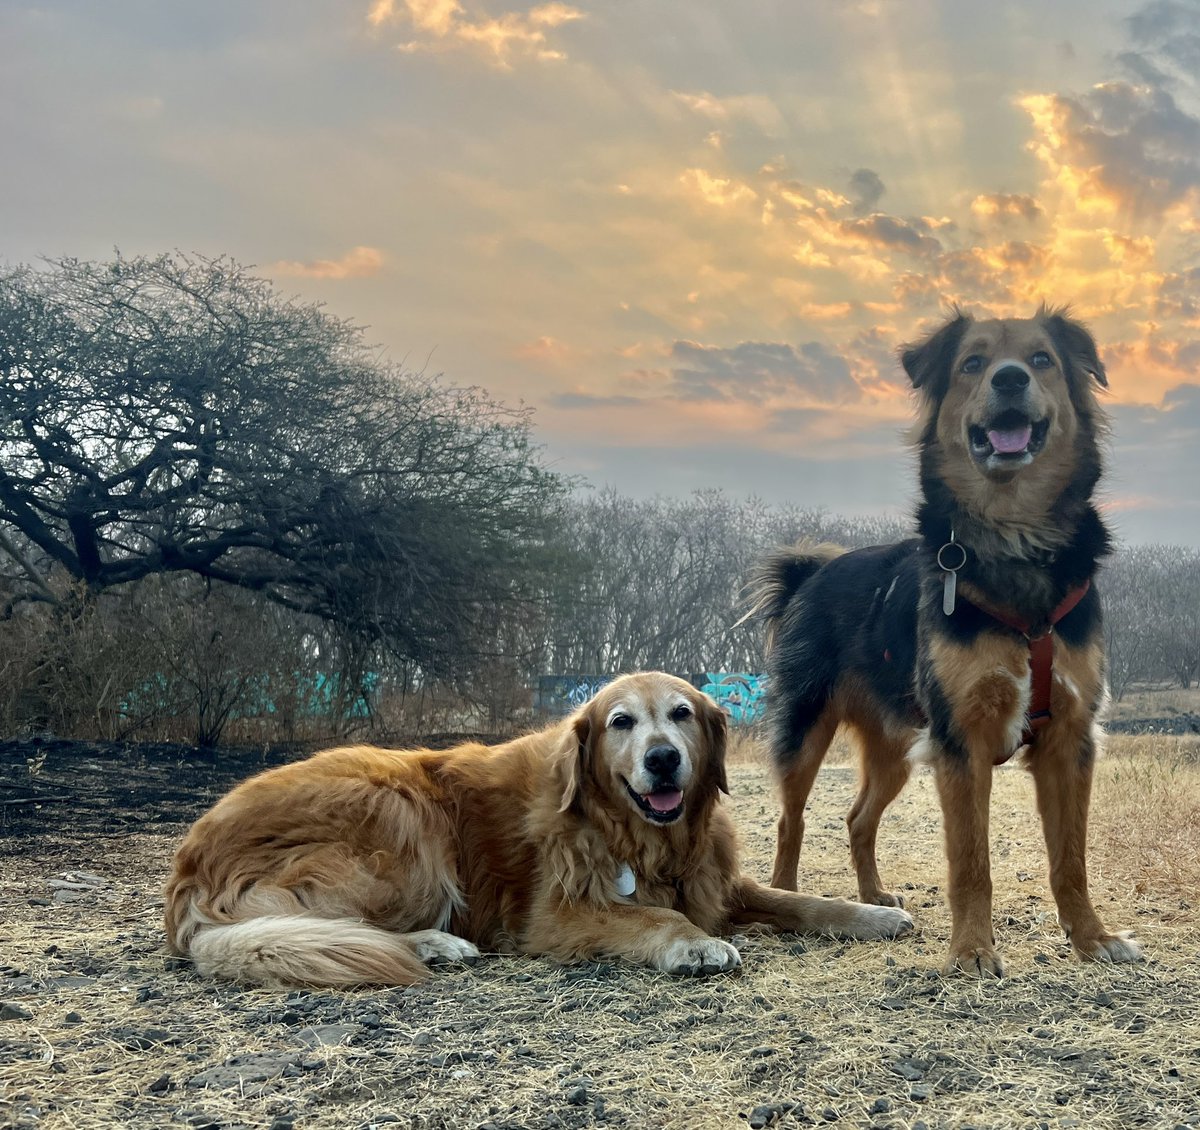 Good morning from us . It’s a beautiful day today #DogsofTwittter #sunrise #goldenretriever #indiedog